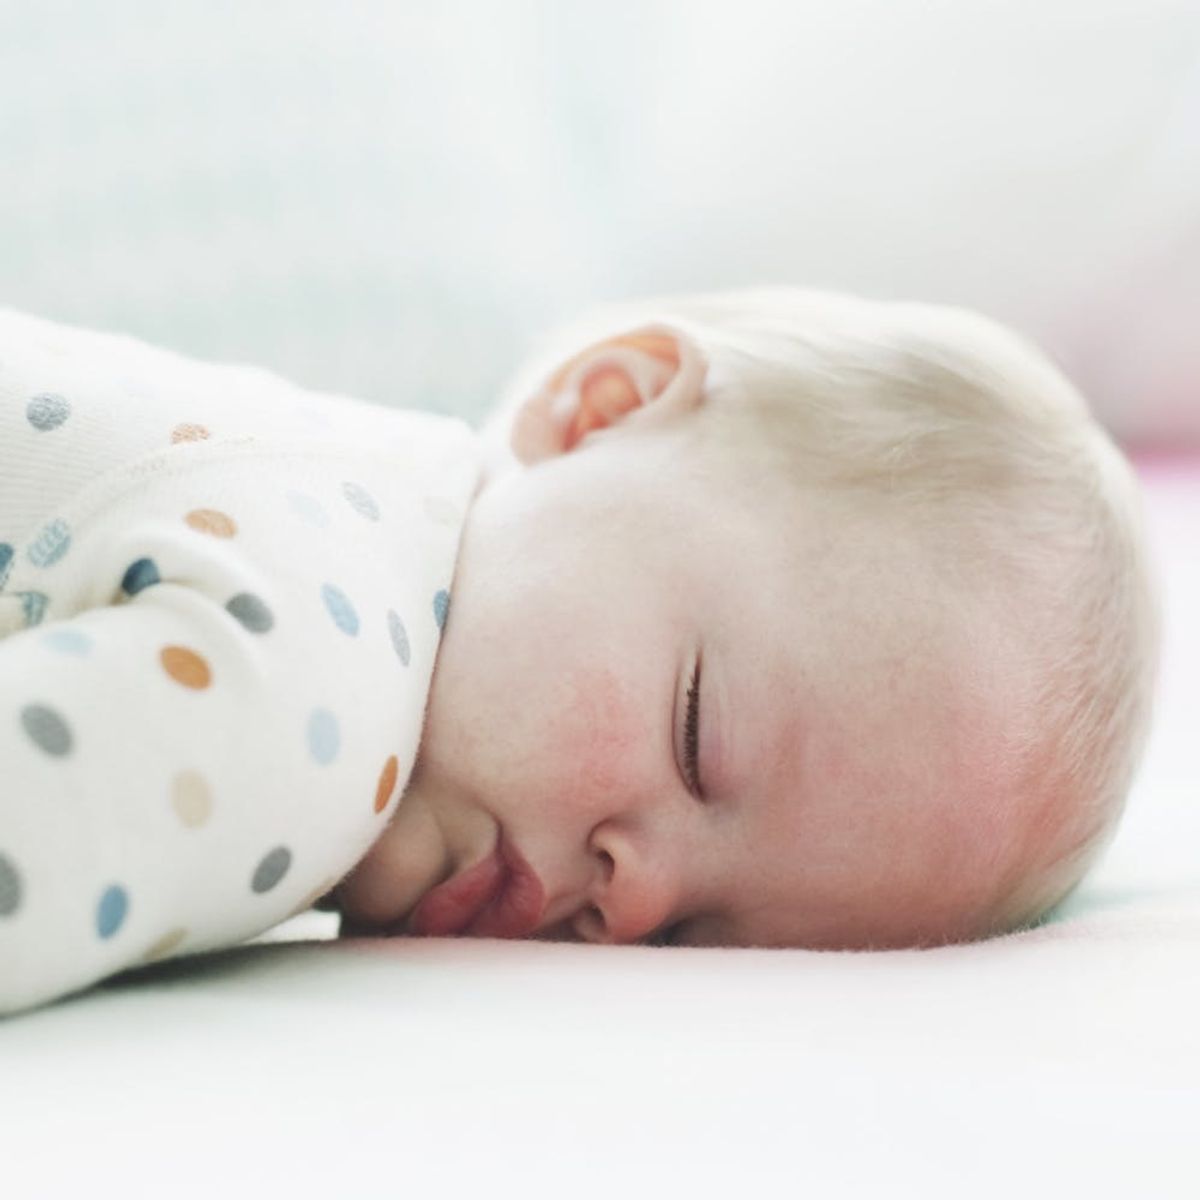 5 Reasons to Nap When Your Baby Does